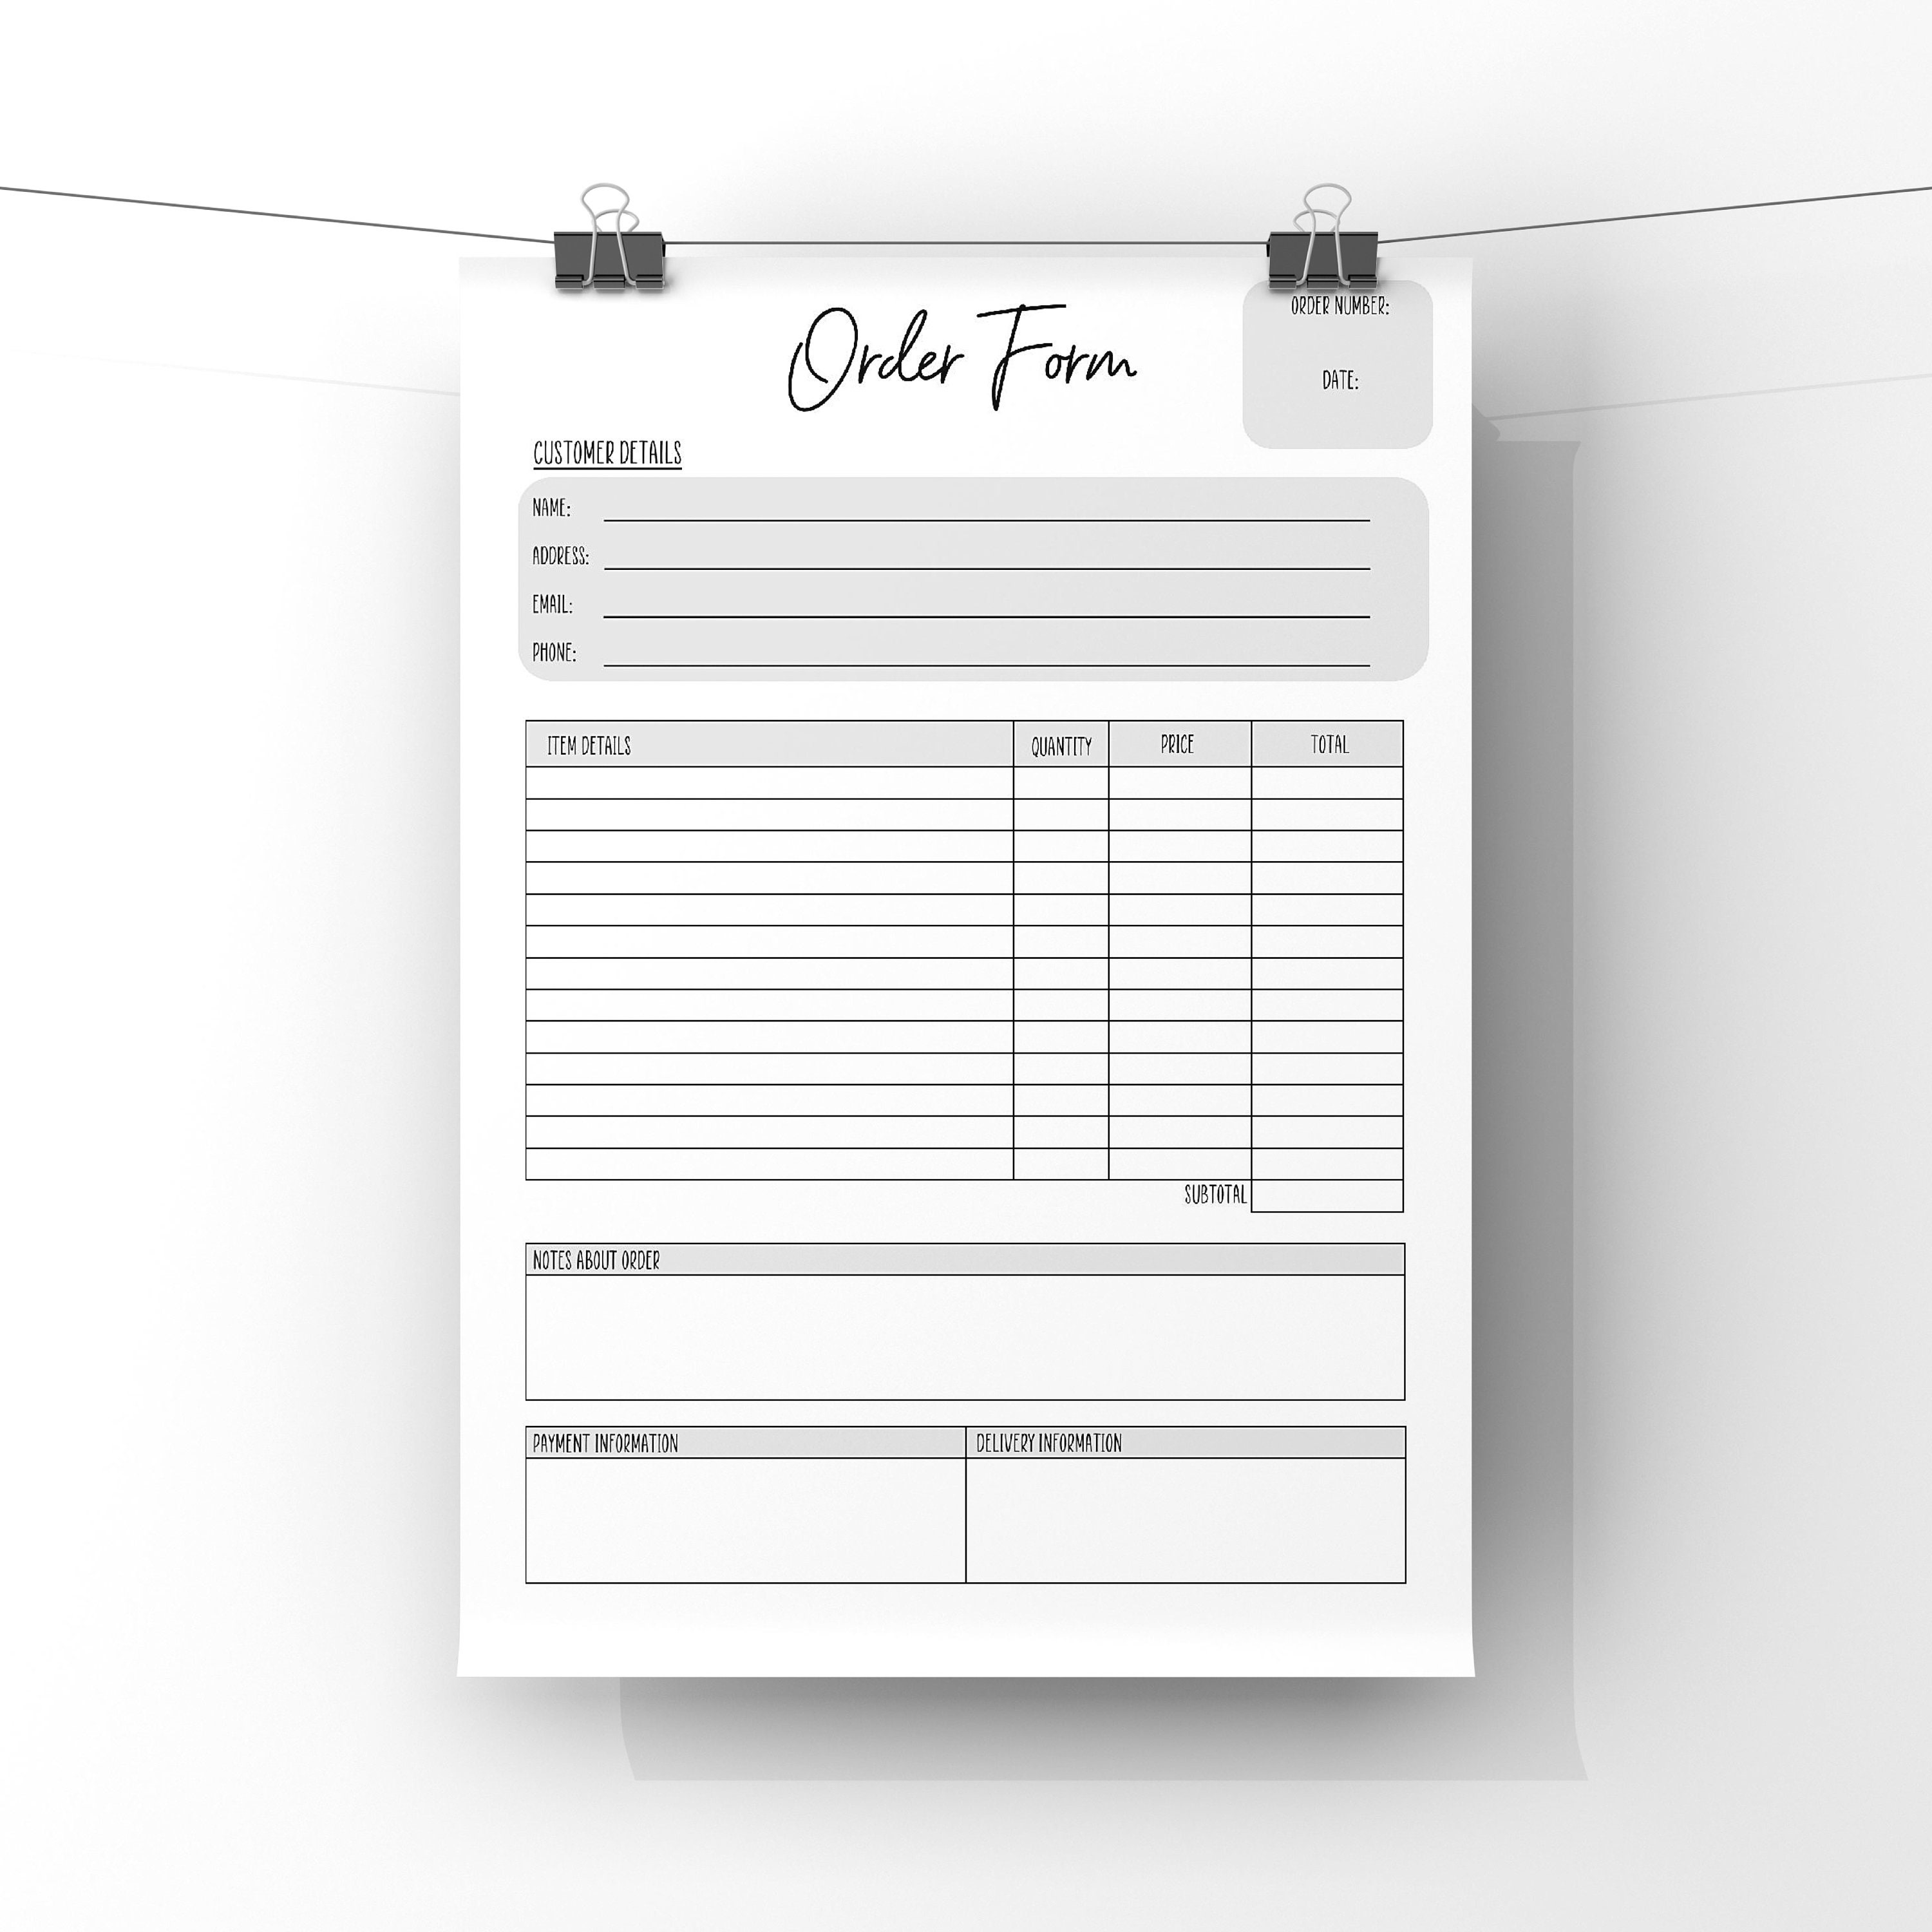 requisition template